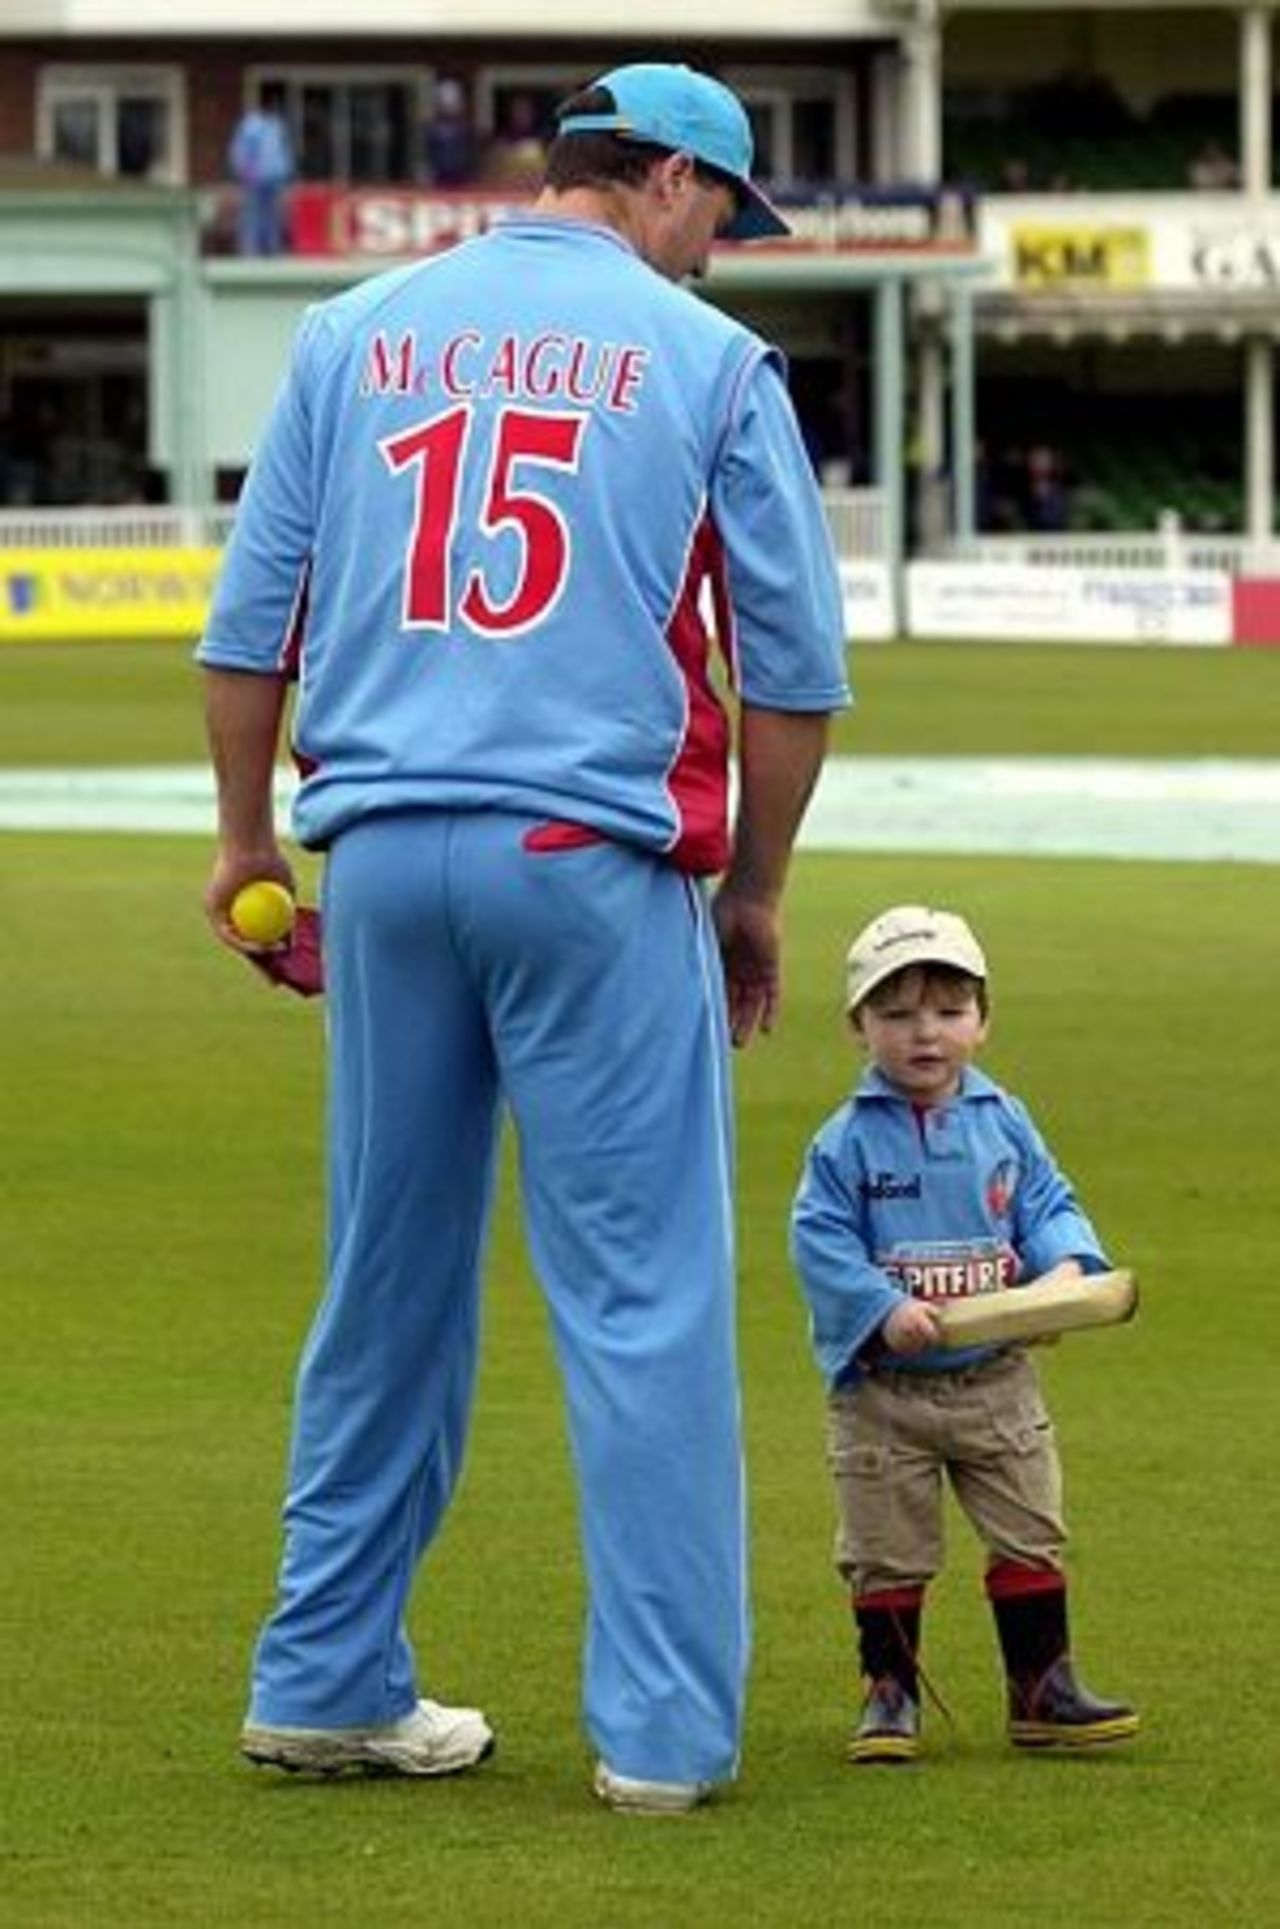 Sun 29 April 2001: Former England player Martin McCague waits with his two year old son Monte for play to start in the Norwich Union League Division One match against Warwickshire at Canterbury